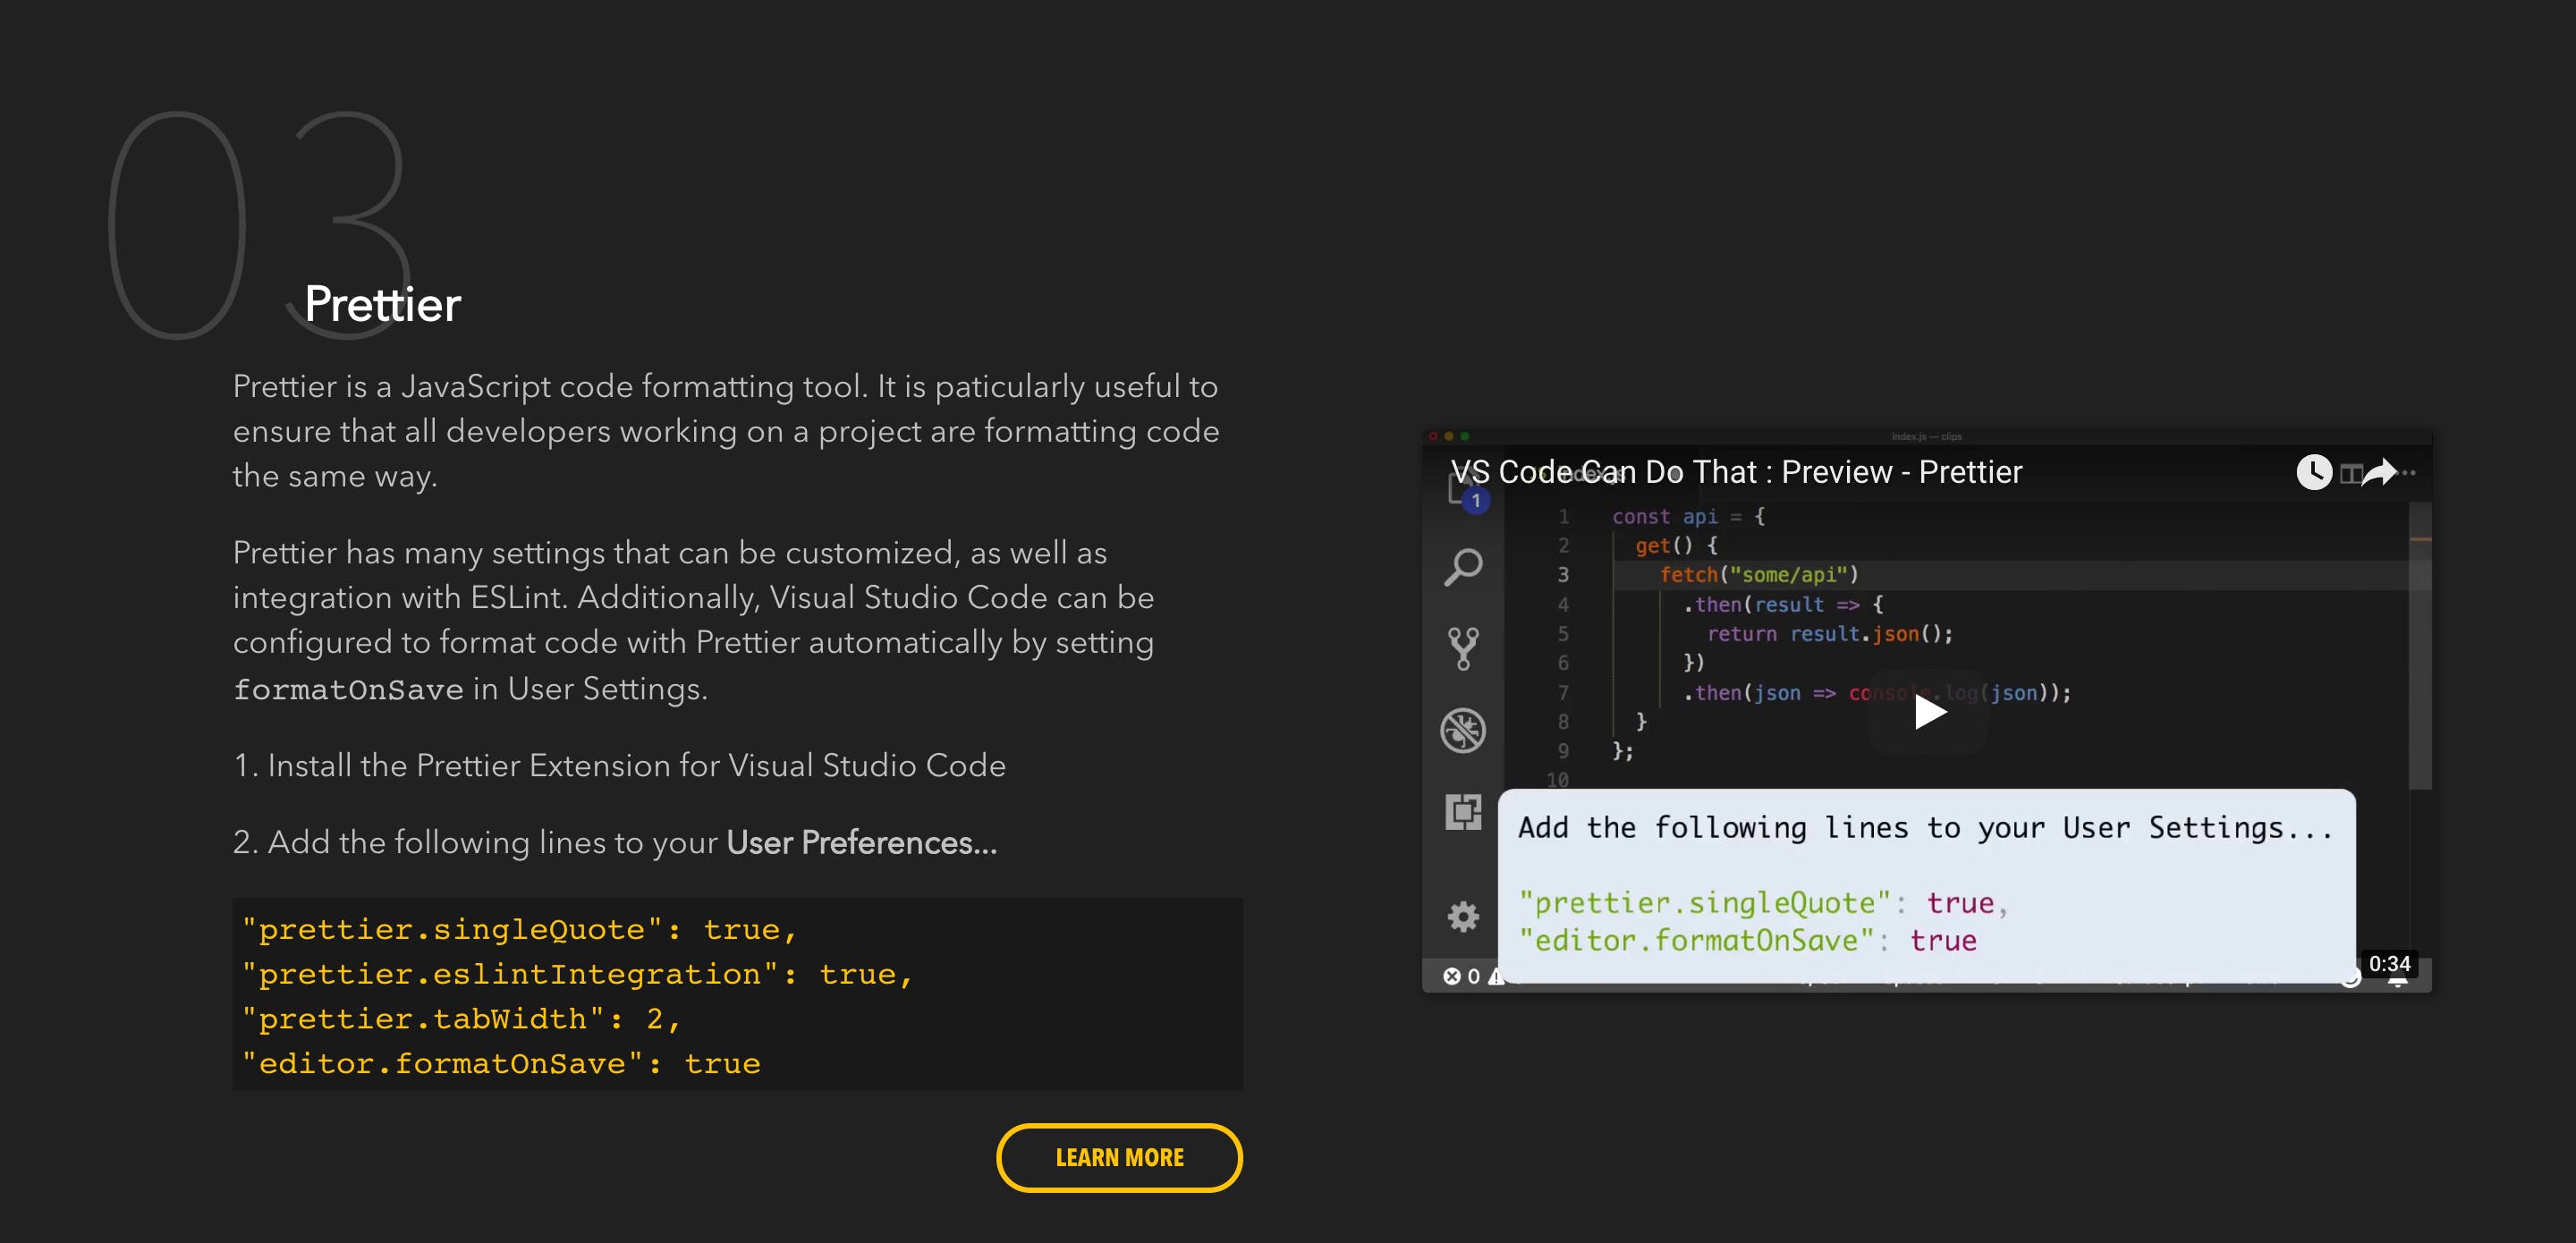 VS Code can do that?! media 1